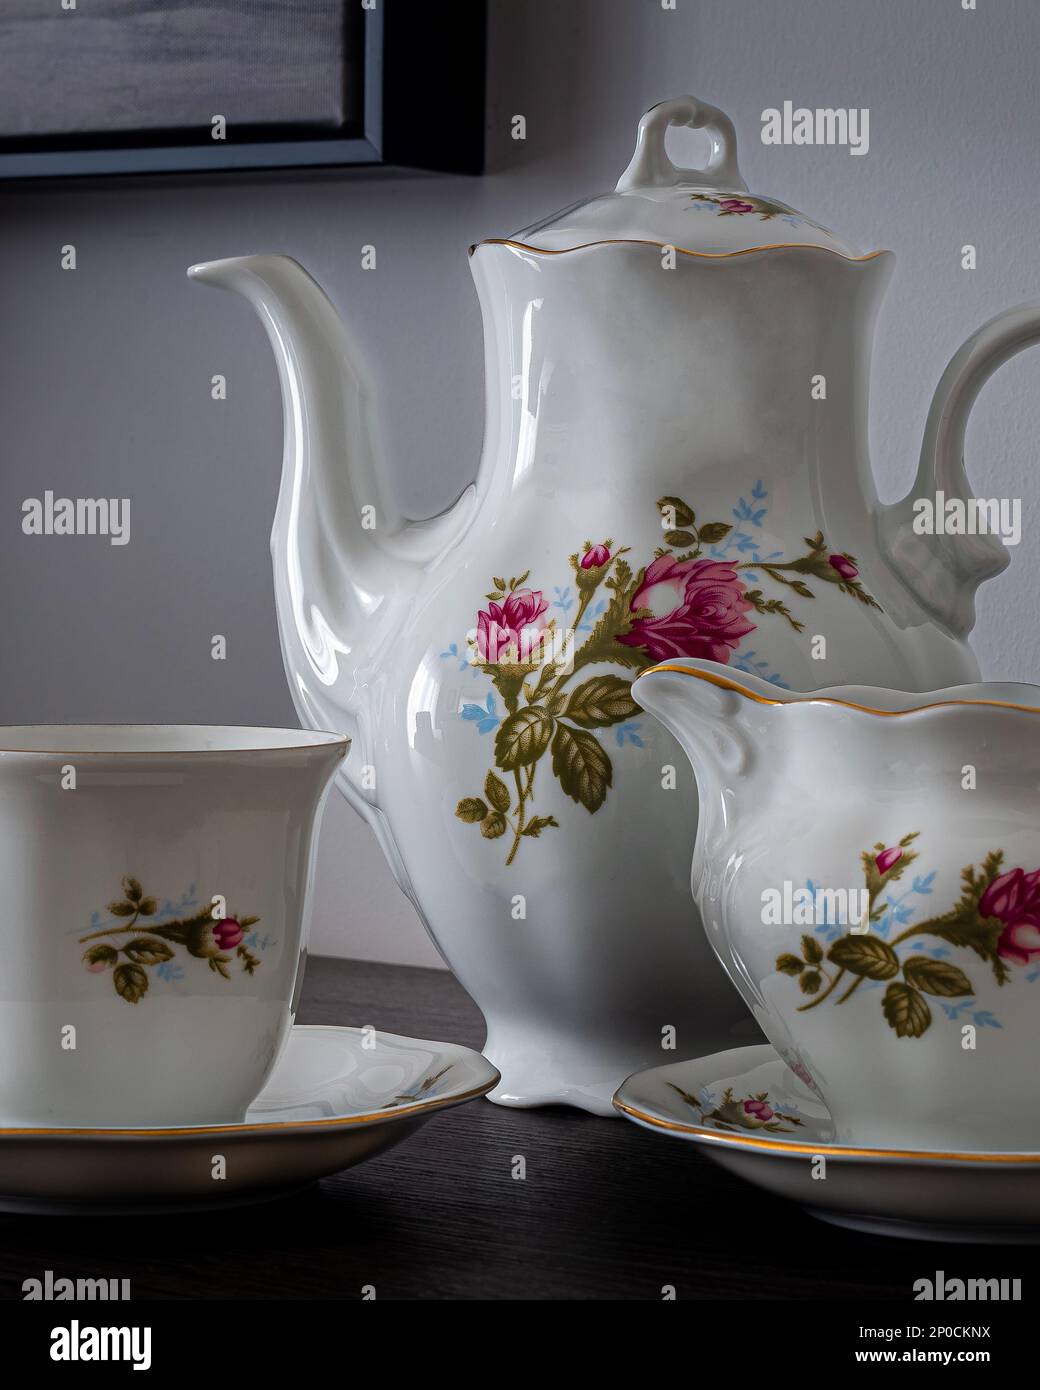 Porcelain tableware, coffee or tea cup. tea or coffee pot and sugar bowl. Hand painted flowers. Can be used to illustrate porcelain in newspaper. Stock Photo